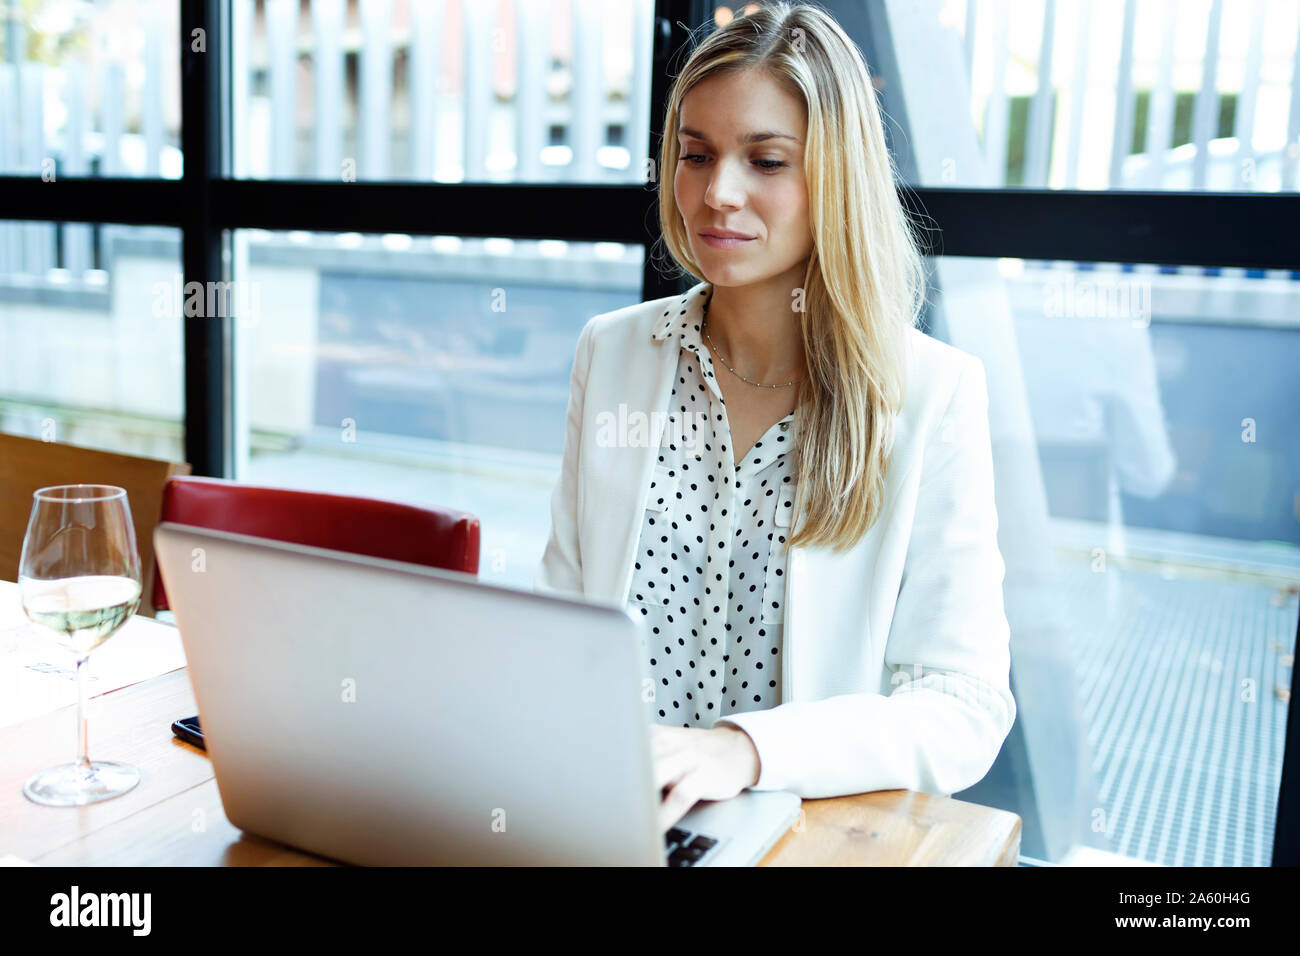 Businesswoman using laptop in a restaurant Stock Photo